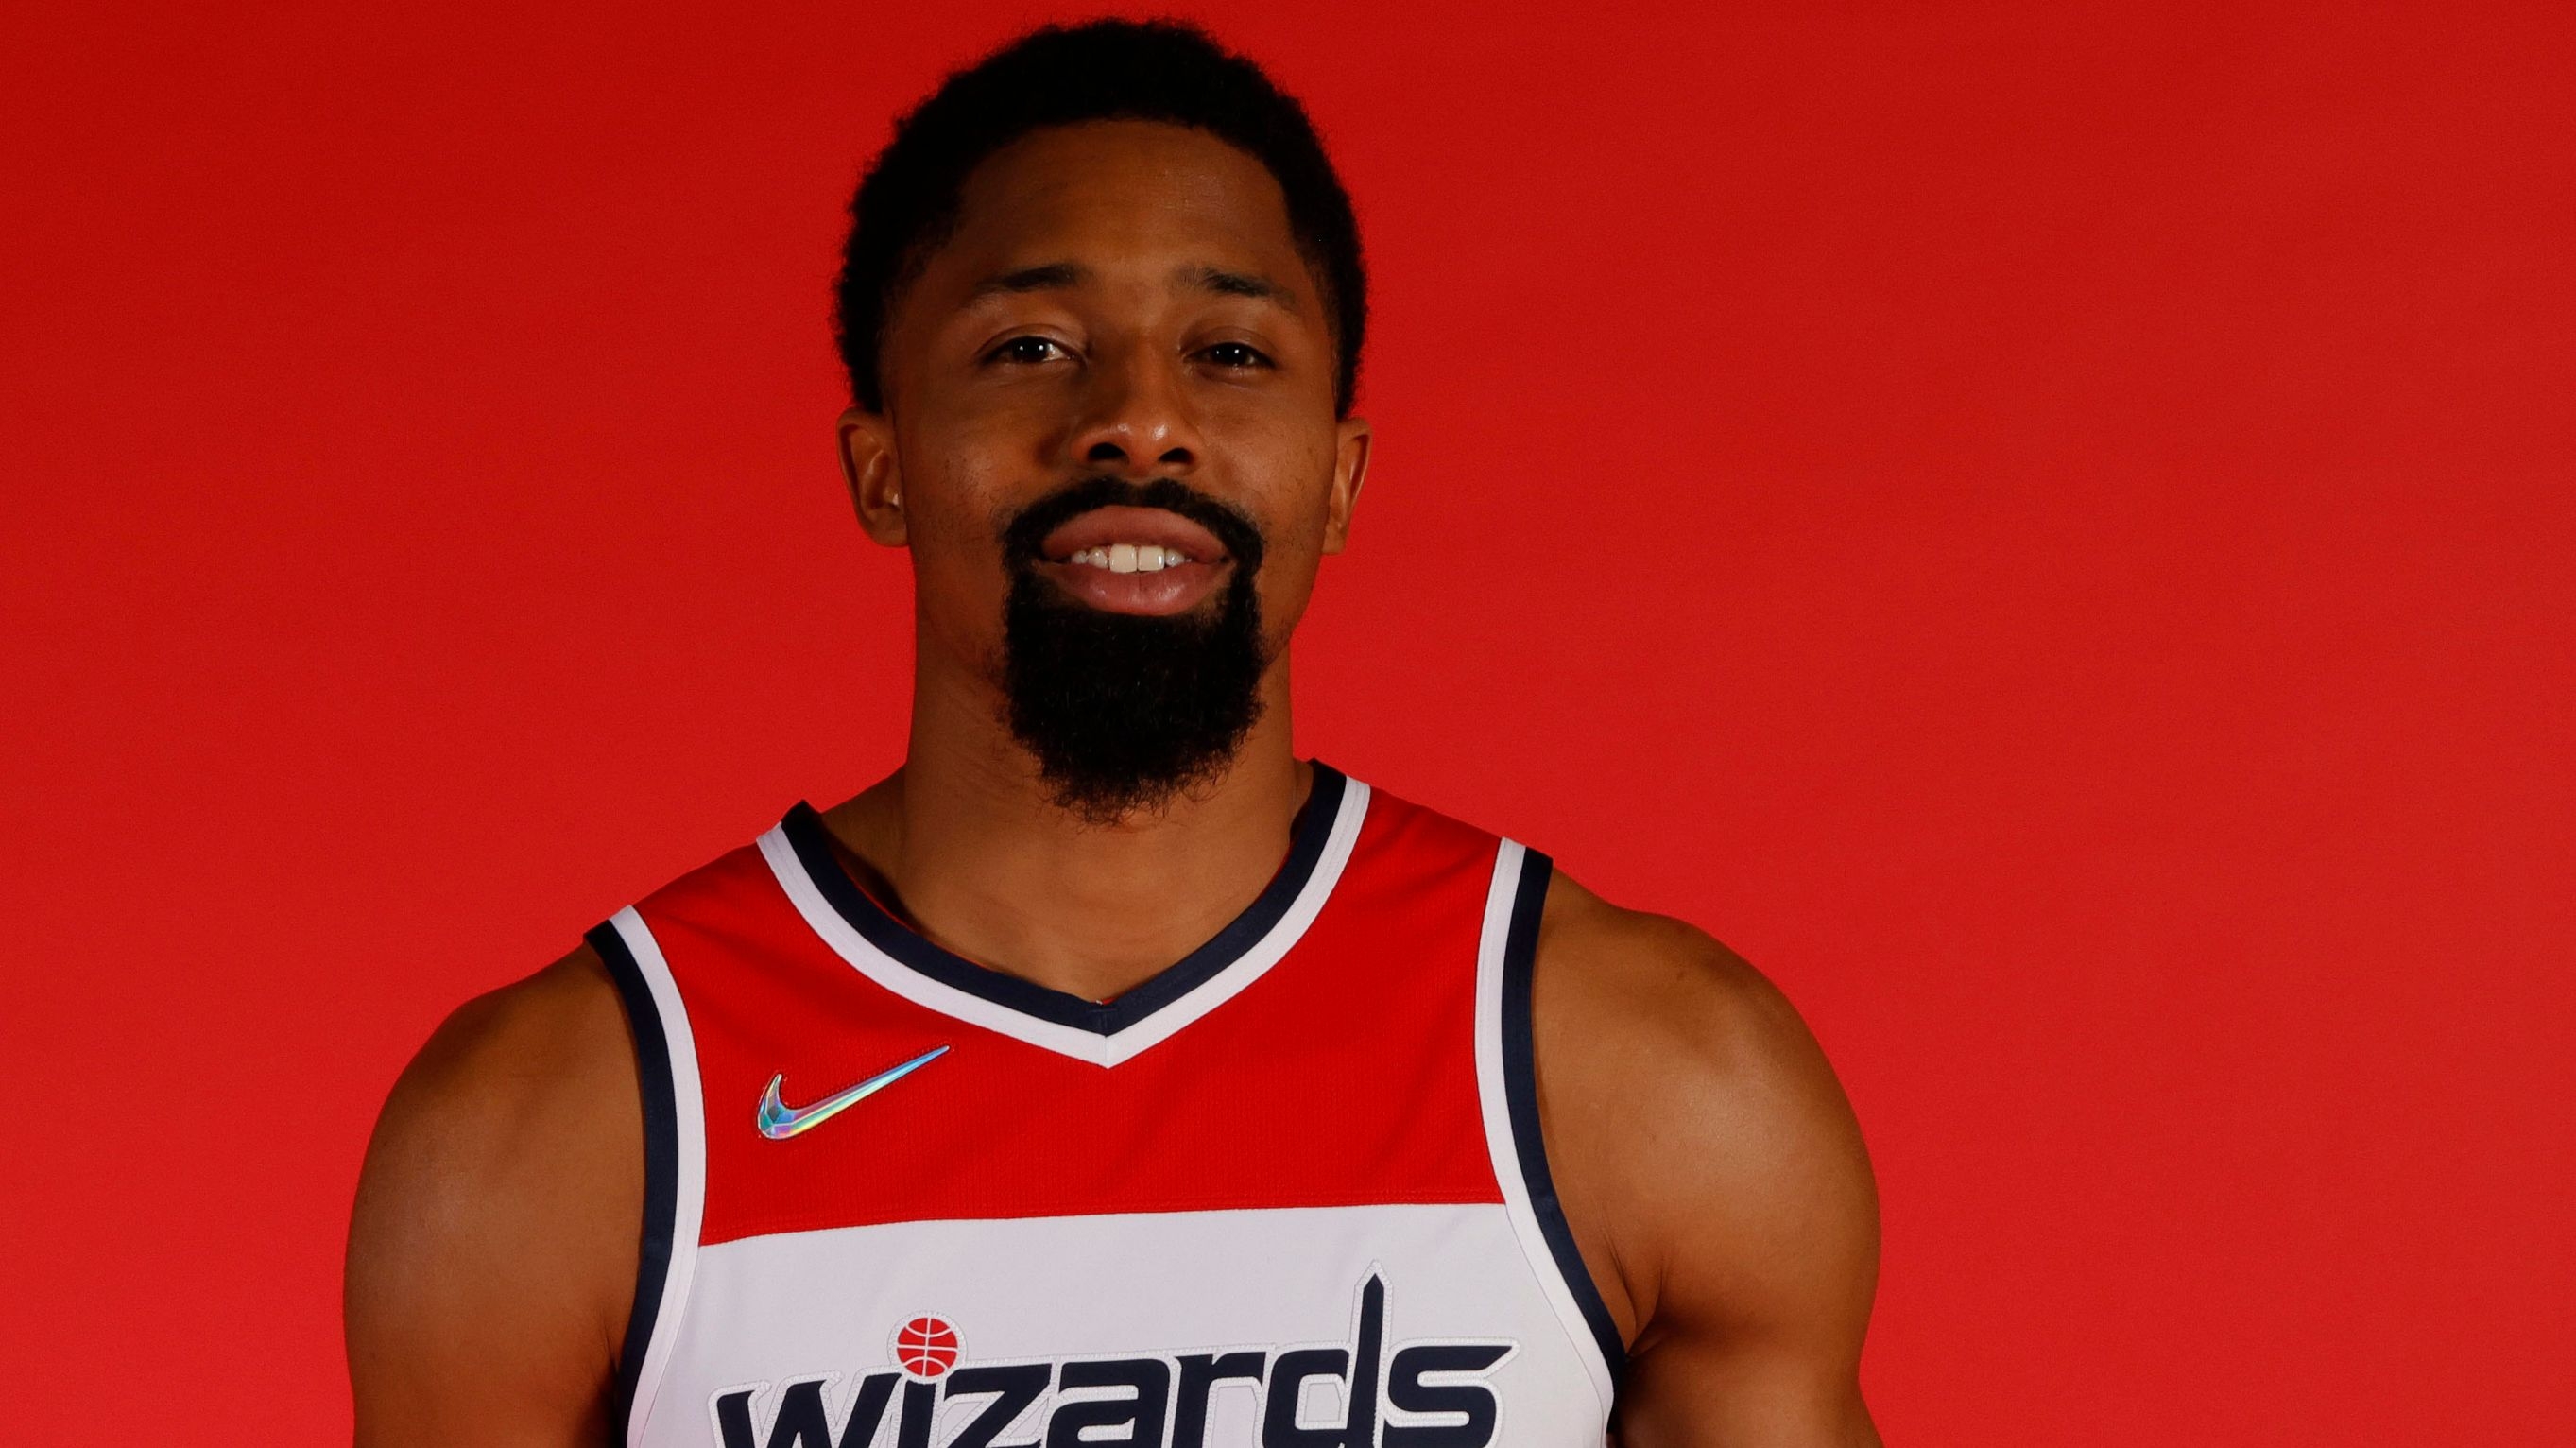 Washington Wizards owner wants $12 million a year for jersey sponsorship